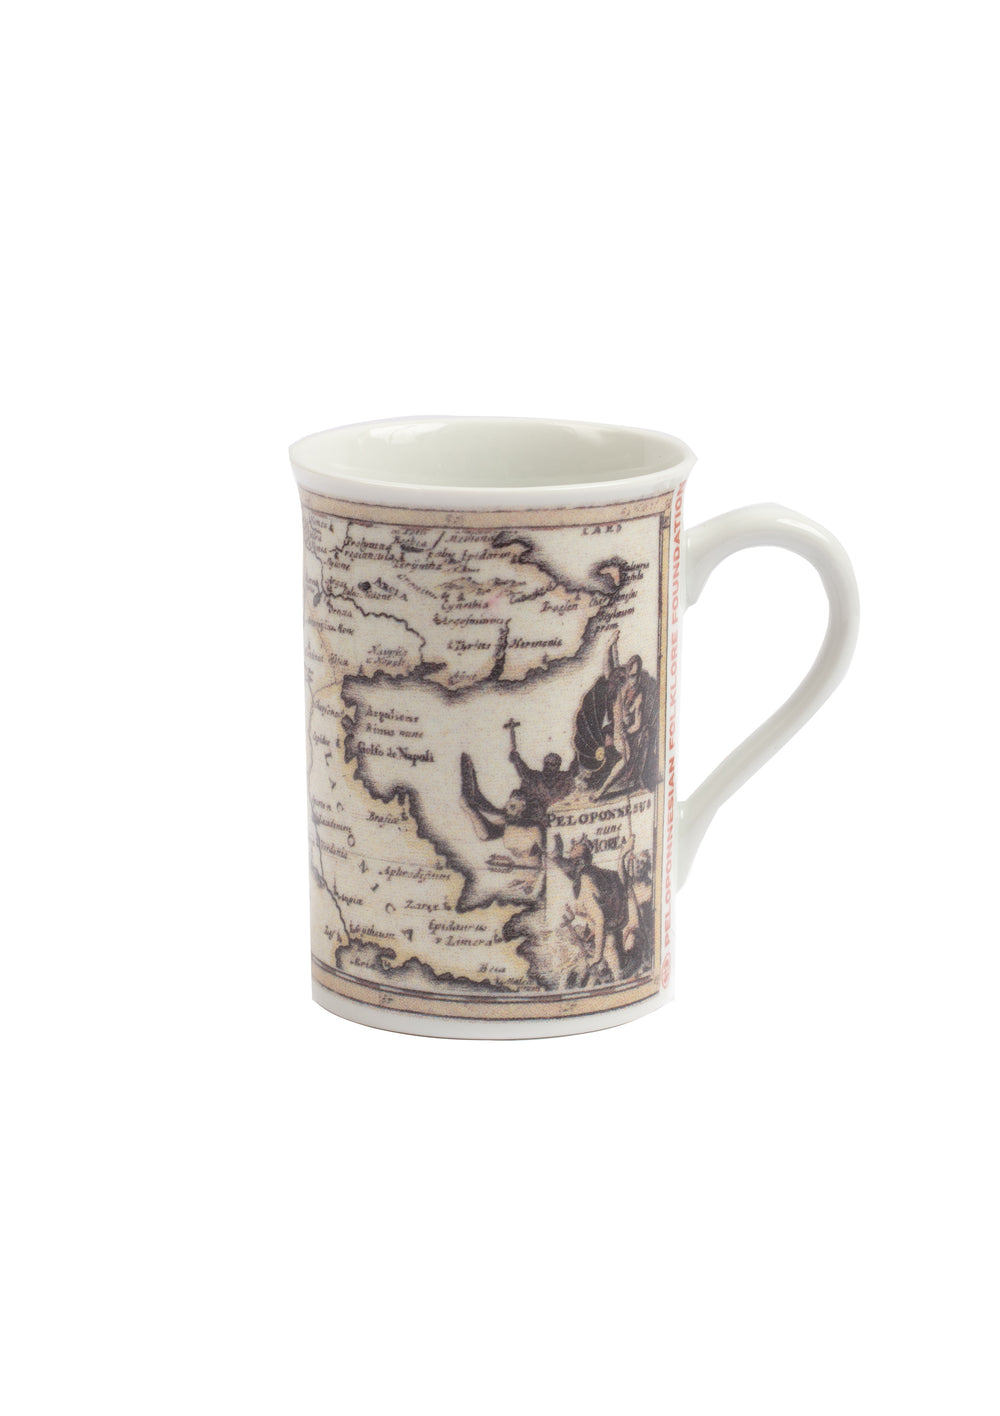 Cup with a map of the Peloponnese